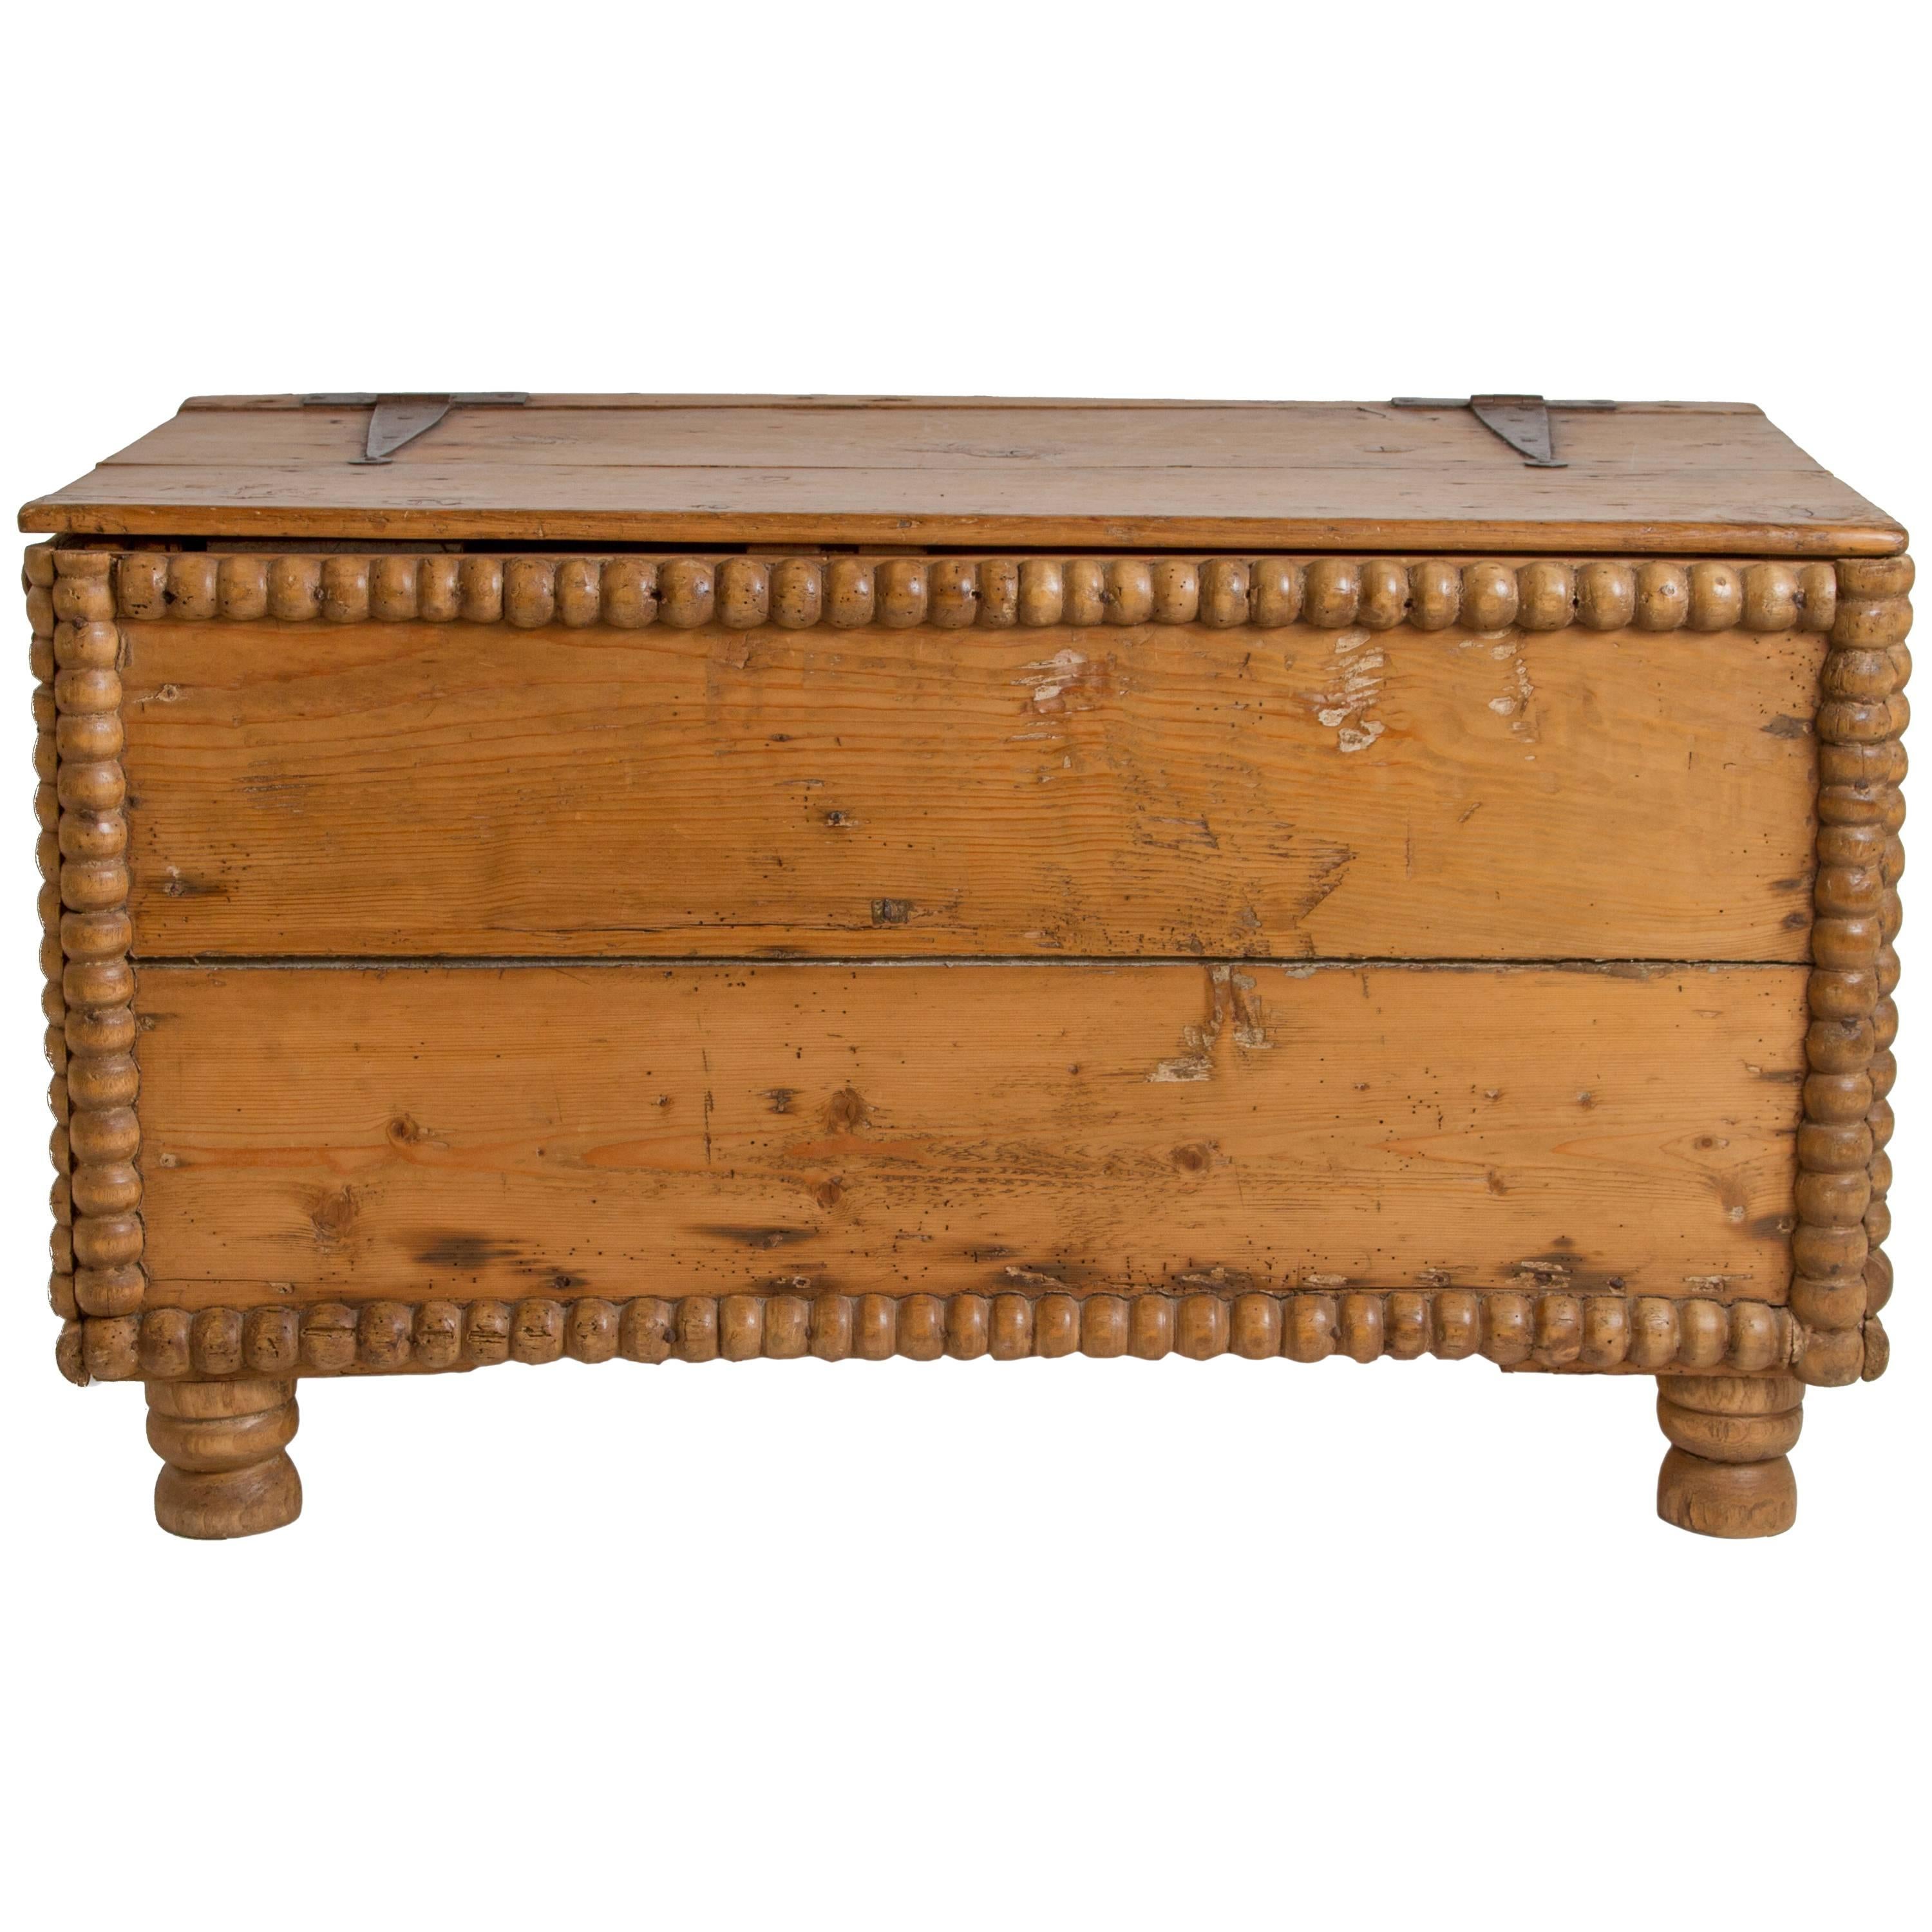 Early 20th Century Pine Trunk